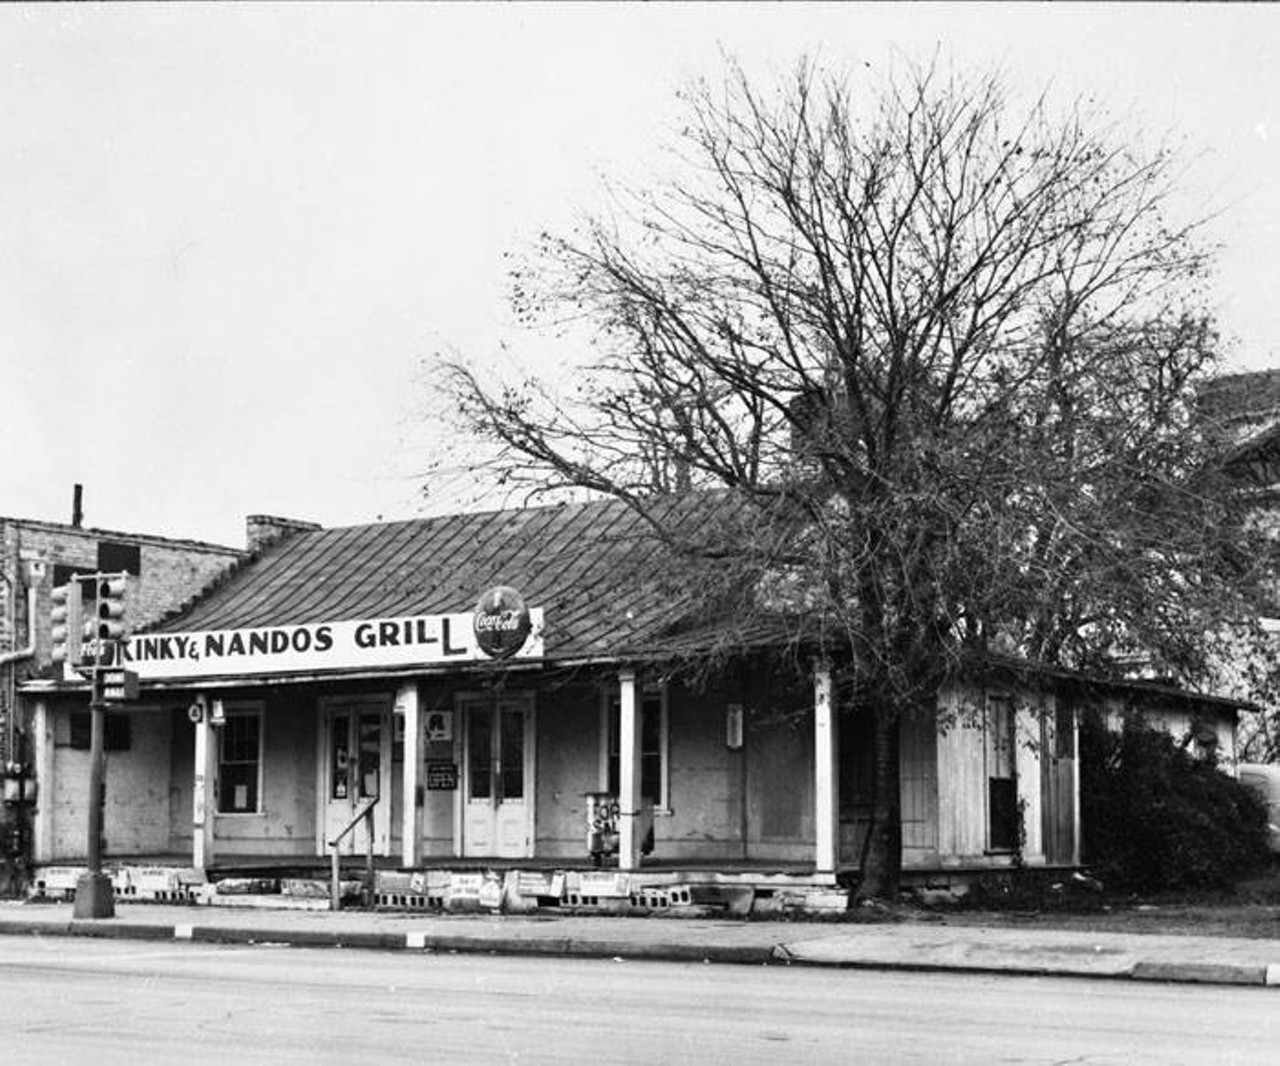 Kinky and Nando's Grill, 404 S. Alamo St.This limestone-exterior restaurant, shown in a 1964 photo, was demolished a few years later to widen the street in preparation for HemisFair '68.